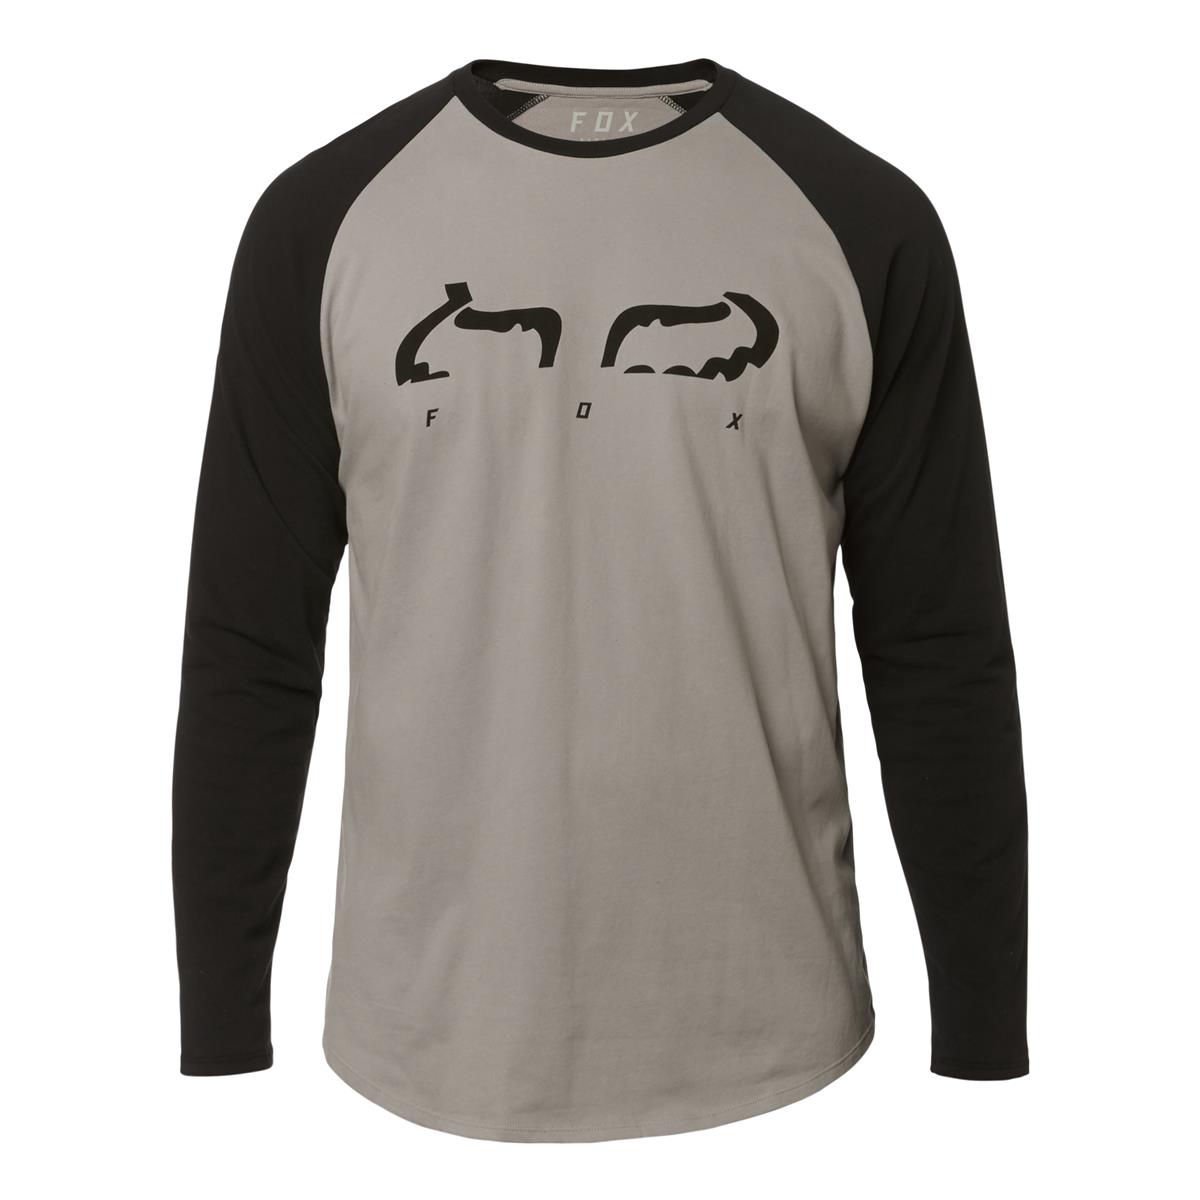 Fox T-Shirt Manches Longues Strap Airline Steel Grey